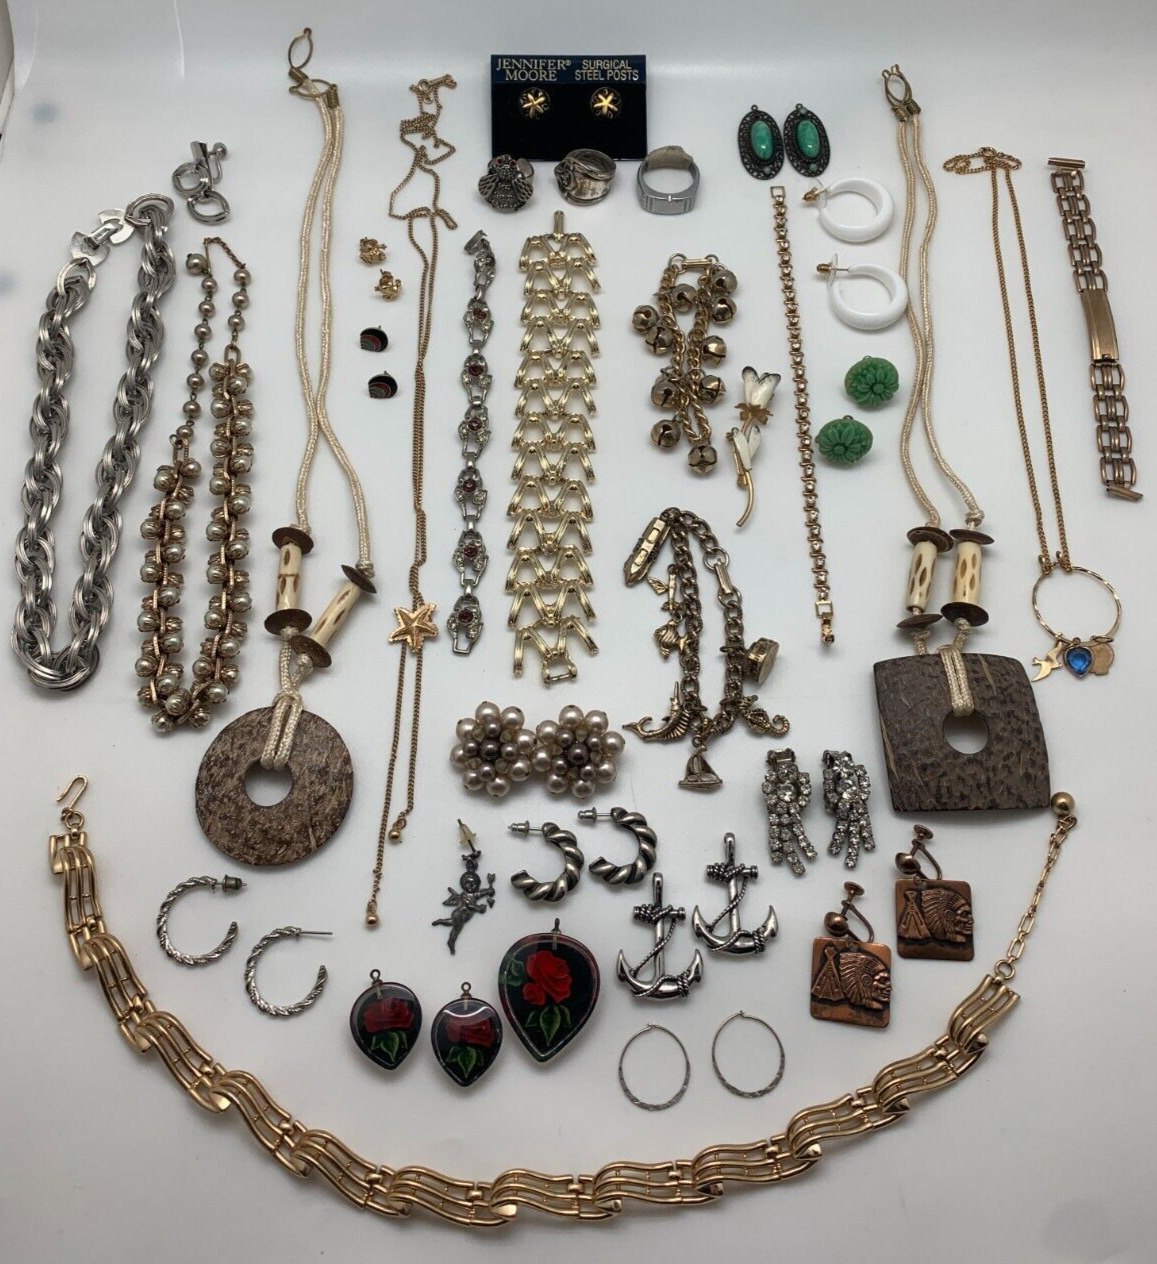 Huge Lot of Vintage Retro Antique Costume Jewelry Collection Set 60s ...